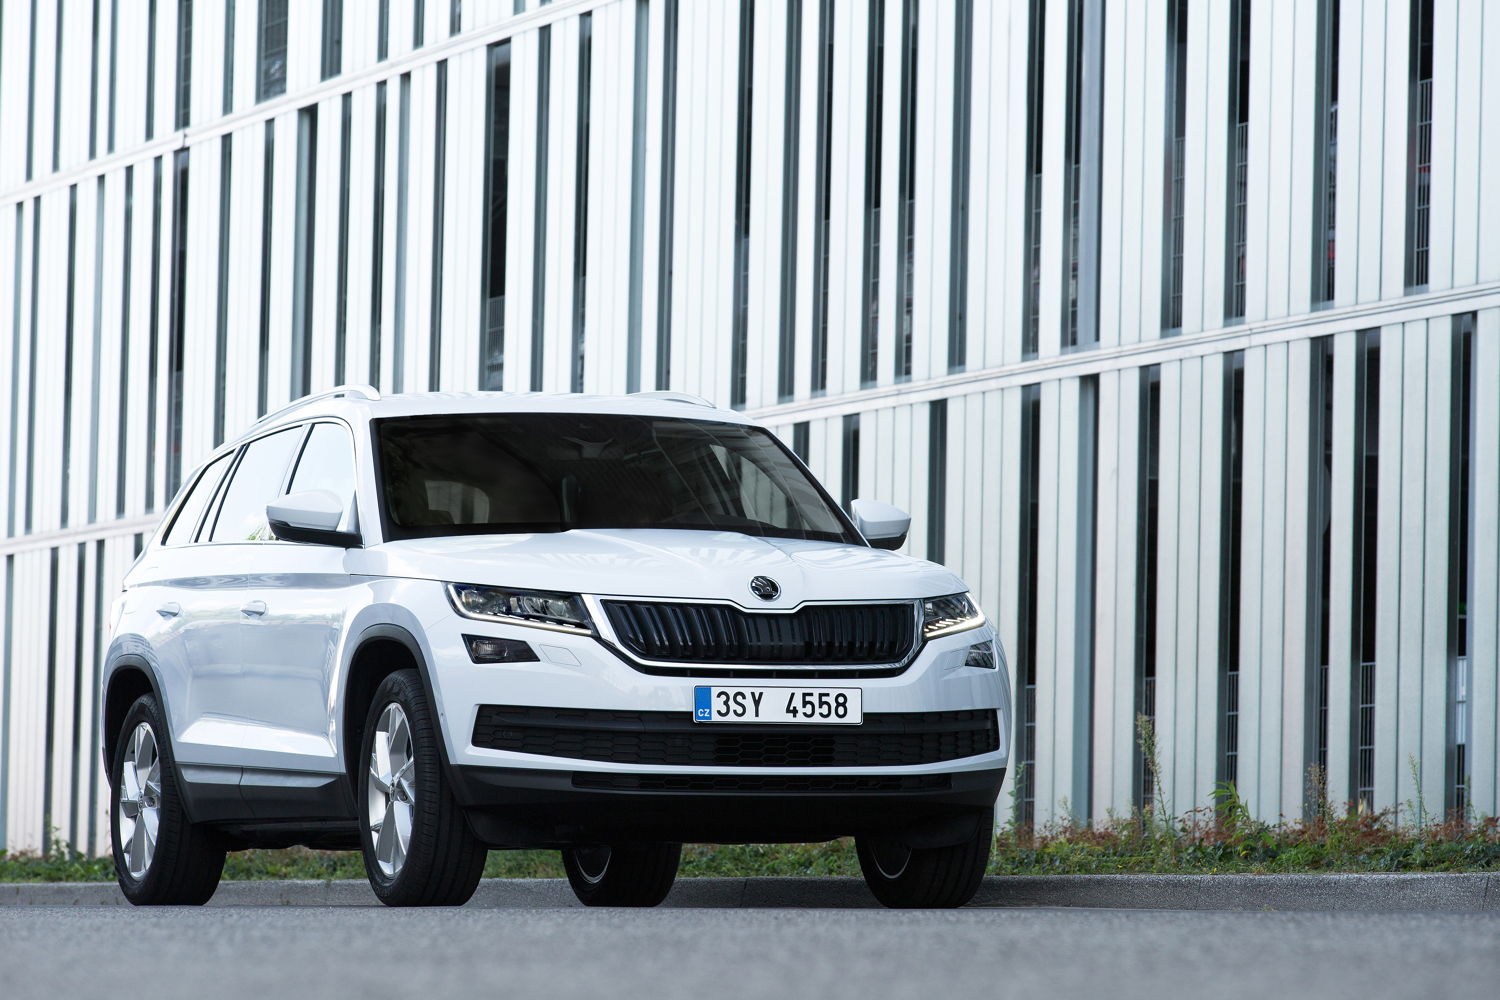 Strong growth factor: in 2017, the ŠKODA KODIAQ has already been delivered to 74,100 customers worldwide.